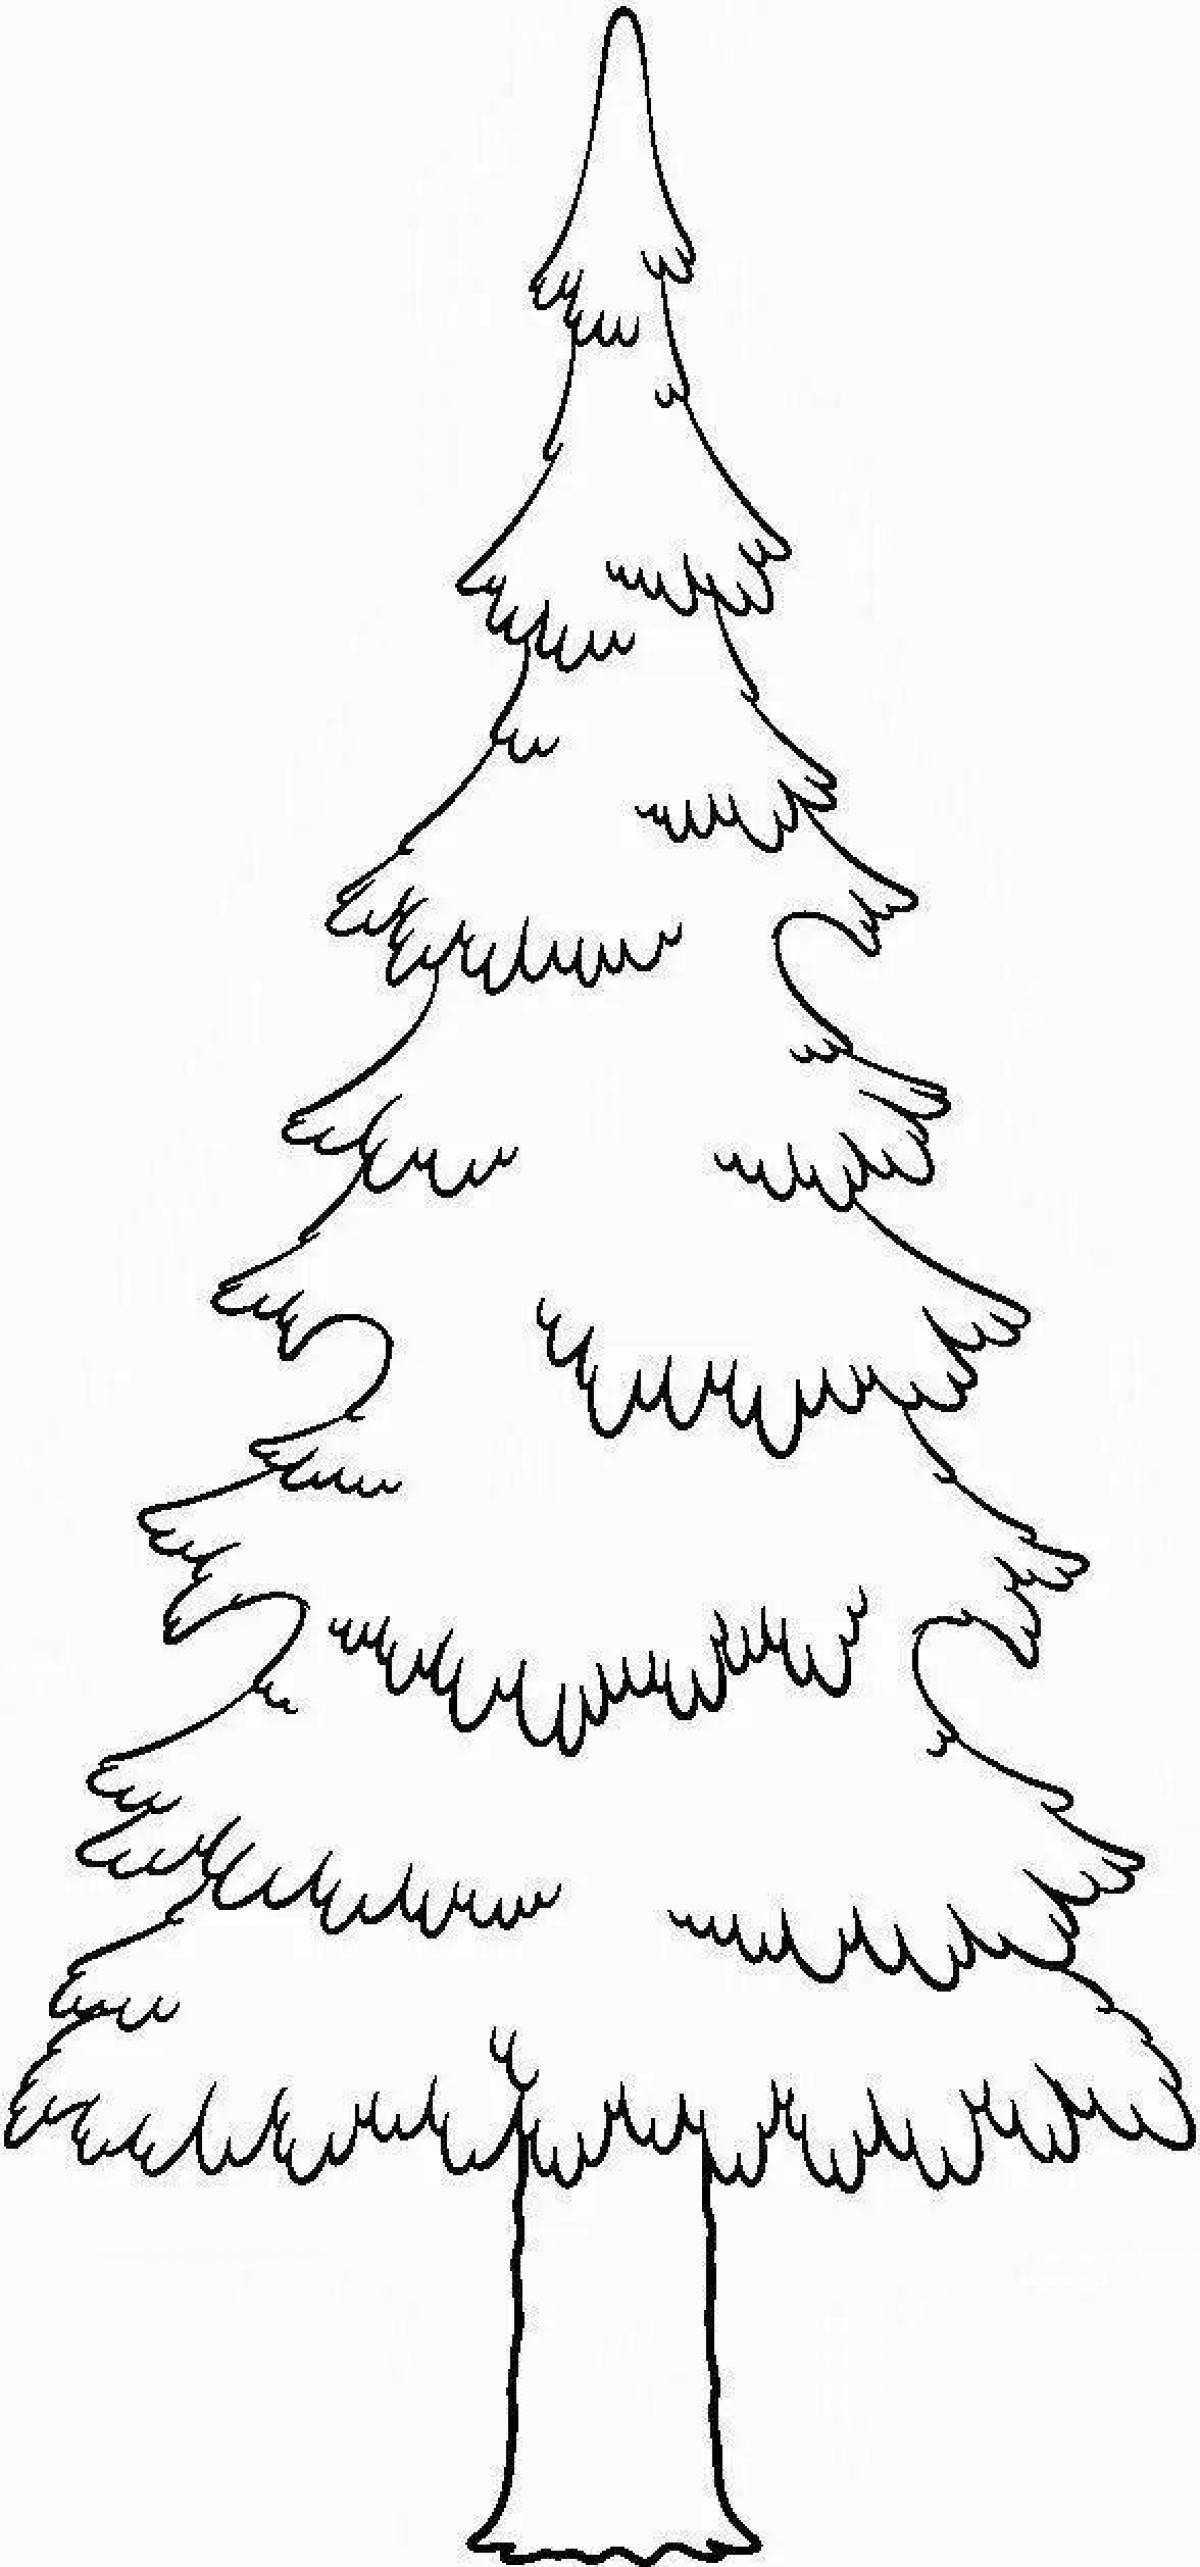 Children's Christmas tree coloring book